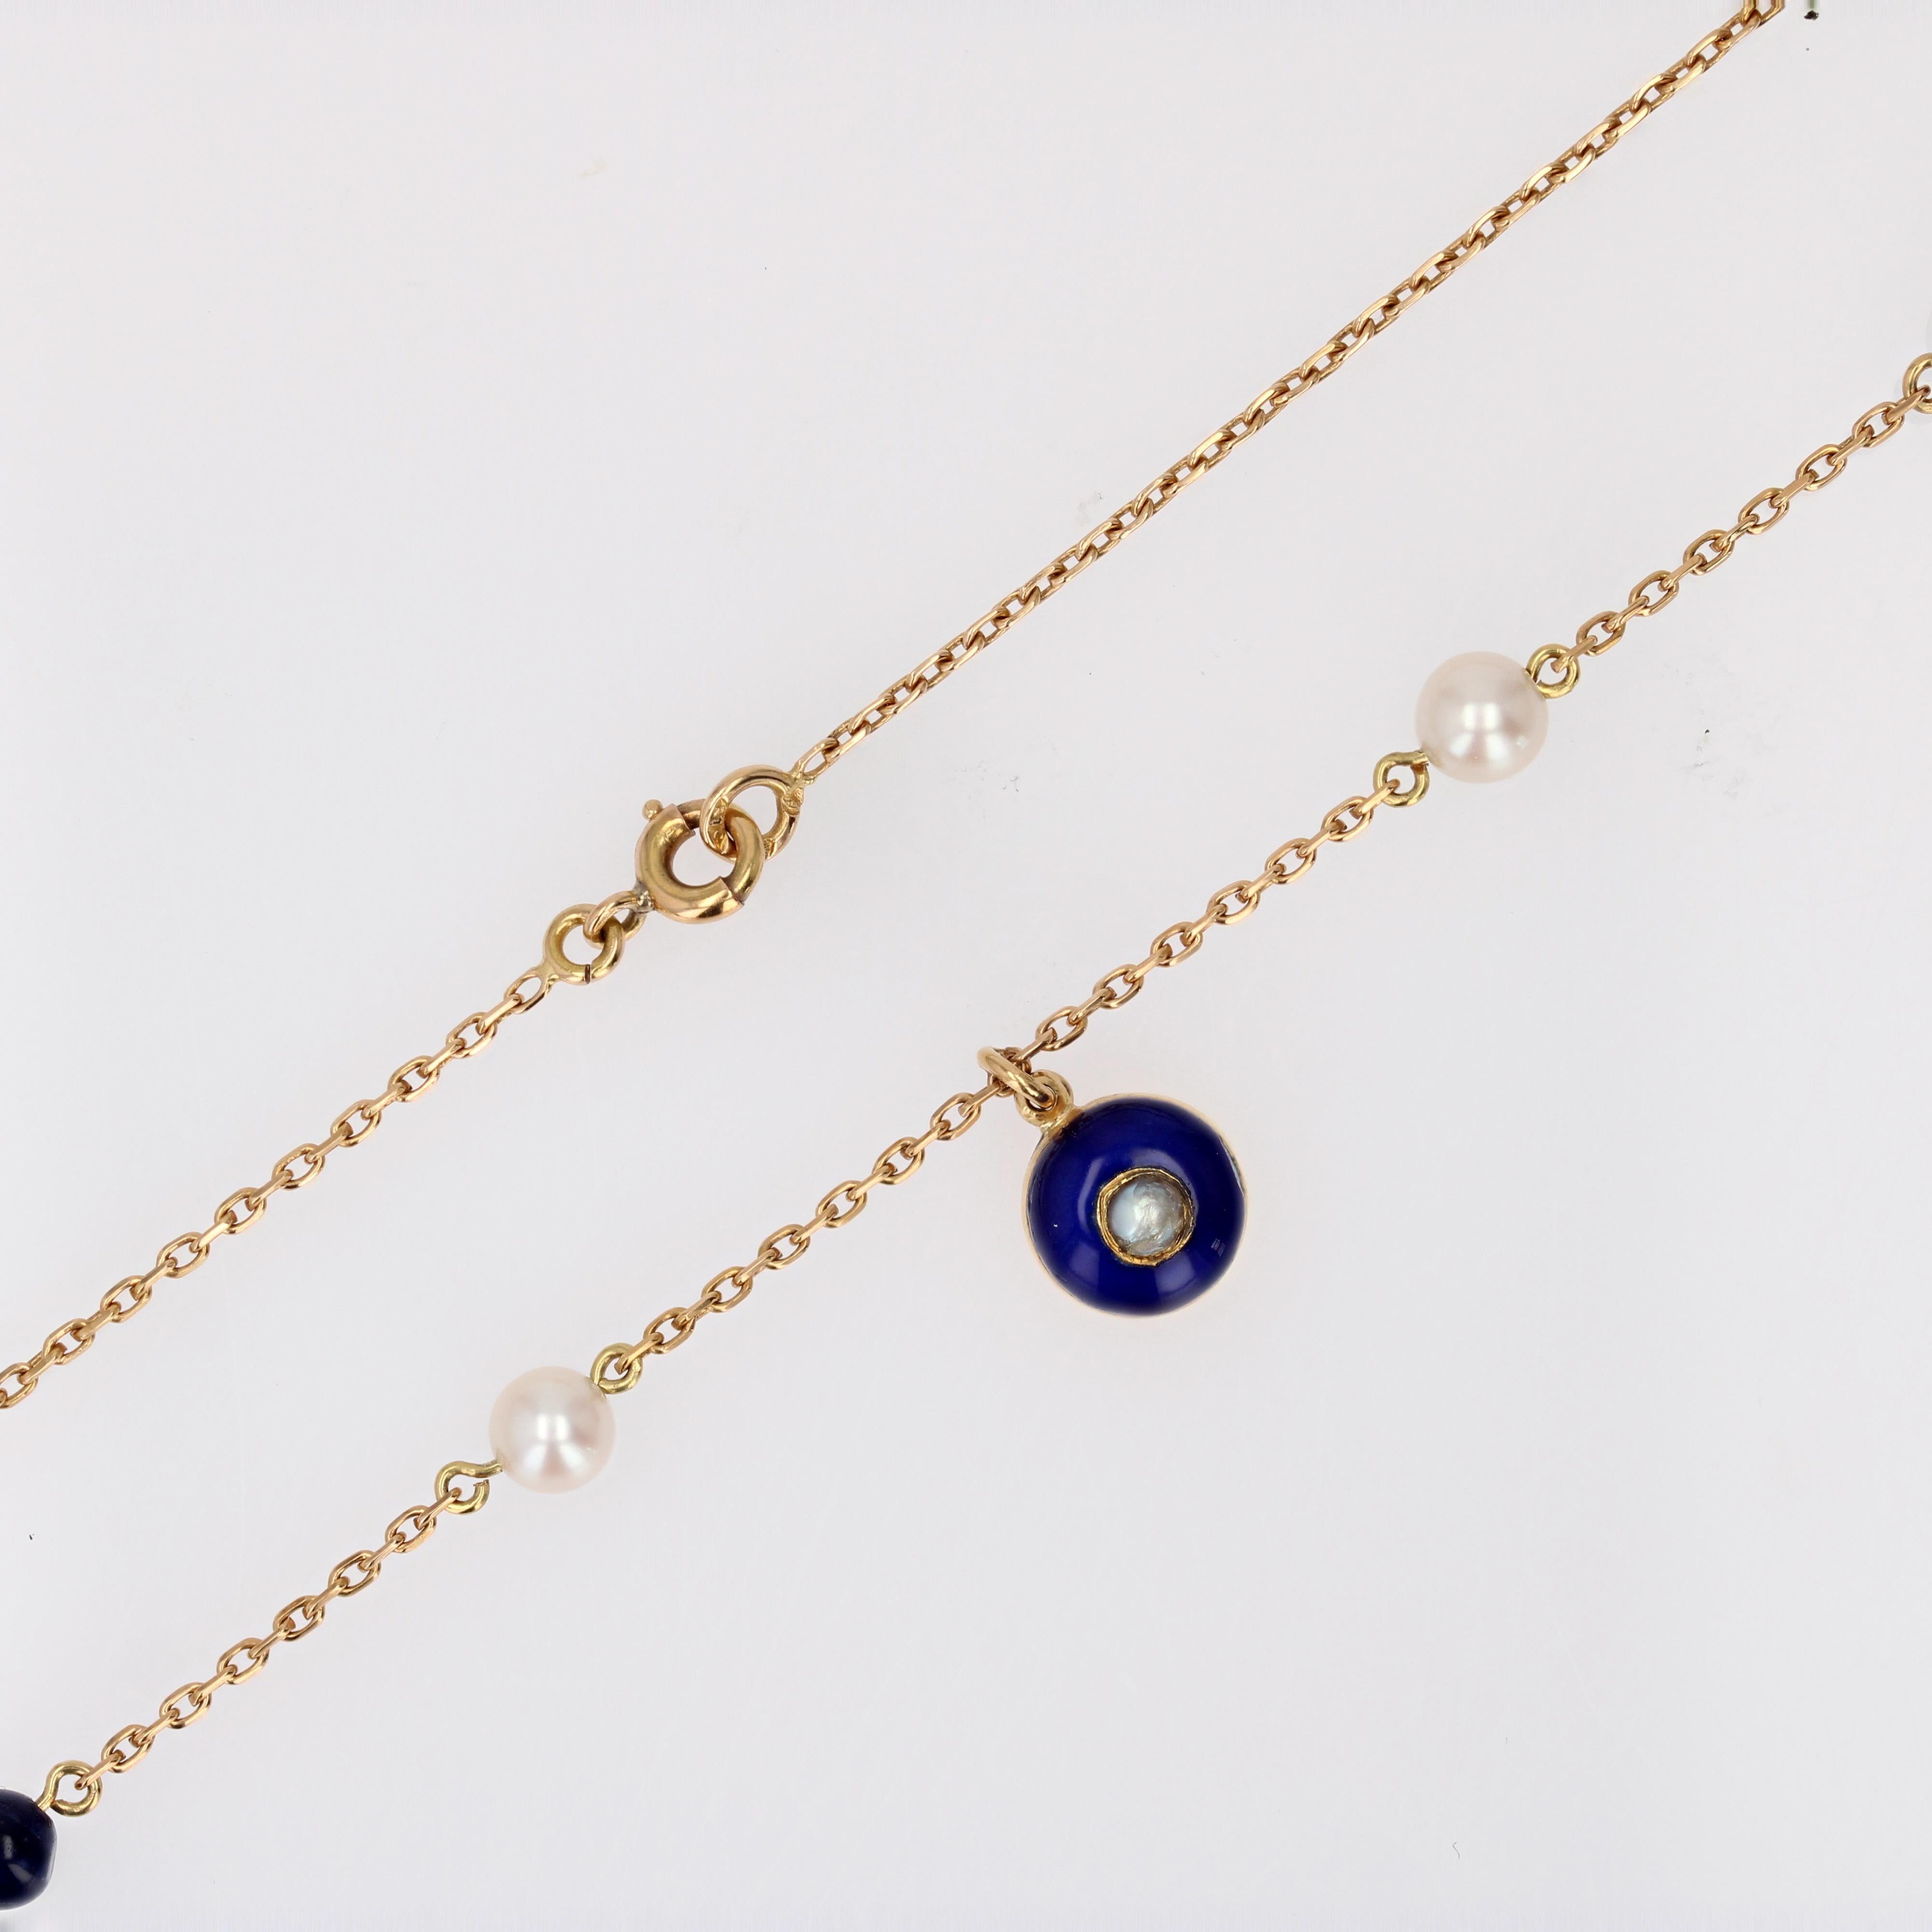 French 19th Century Pearls, Lapis Lazuli, Enamel and Gold Necklace 1